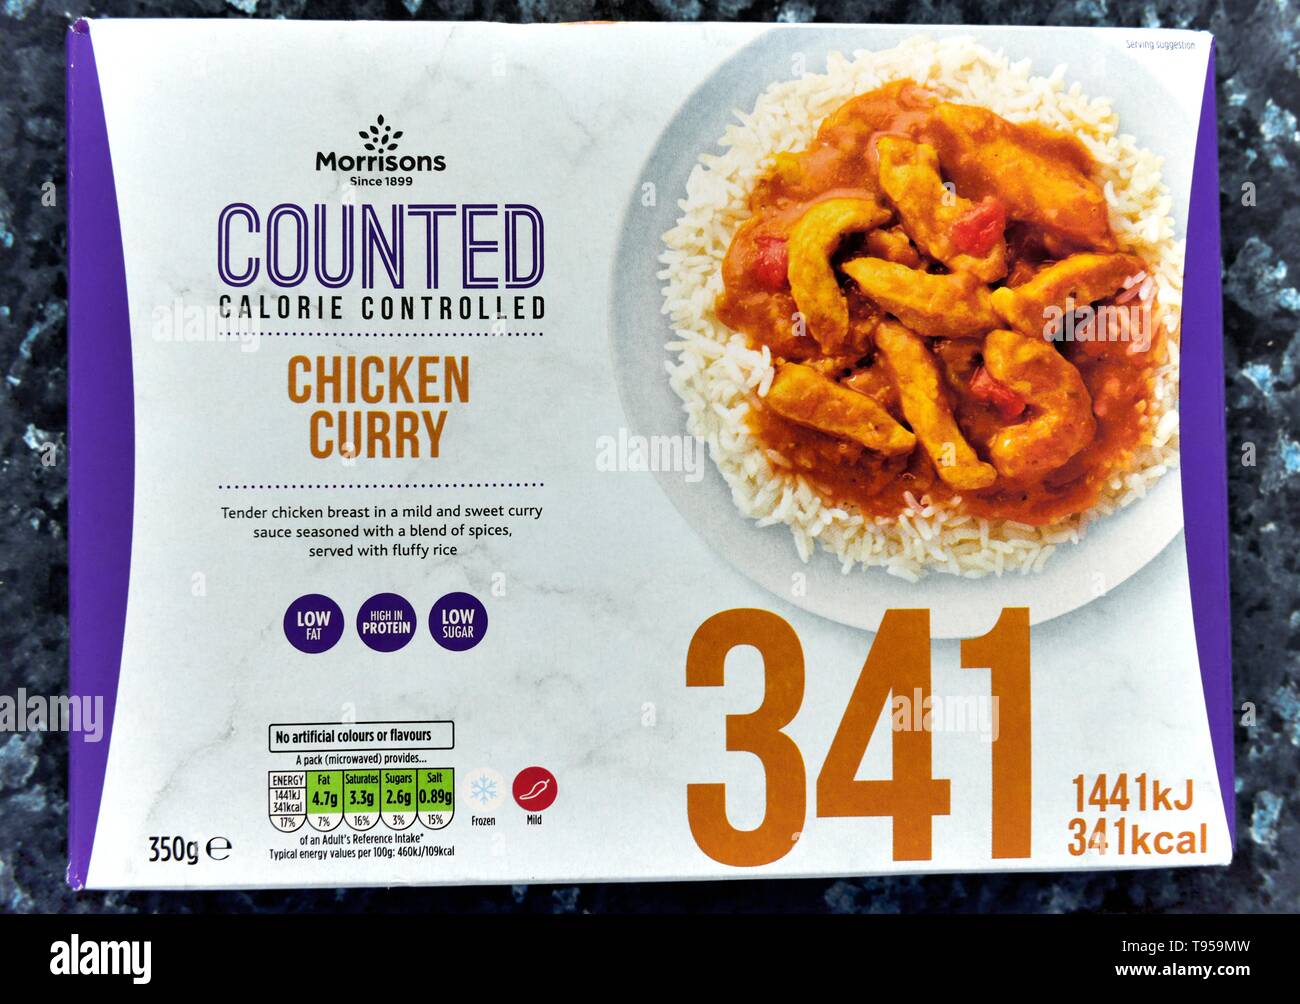 Calorie Controlled,Chicken Curry, Microwave ready meal,341kcal,low fat,low sugar Stock Photo